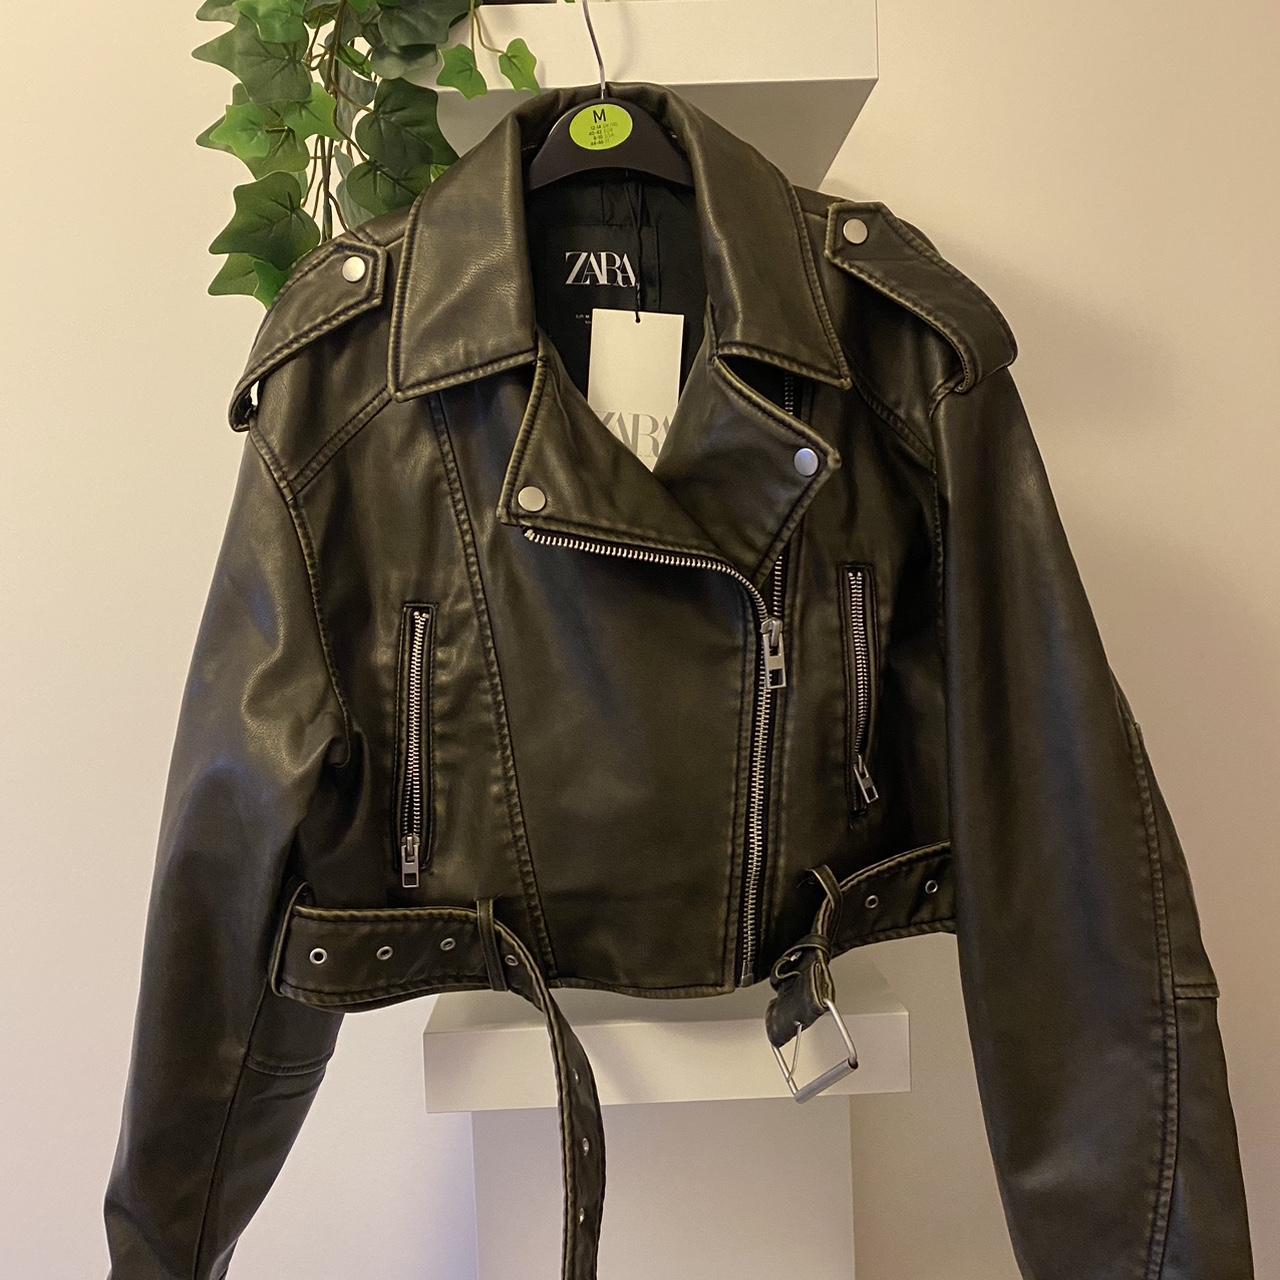 Viral Zara Jacket New with tags RRP £59 selling... - Depop